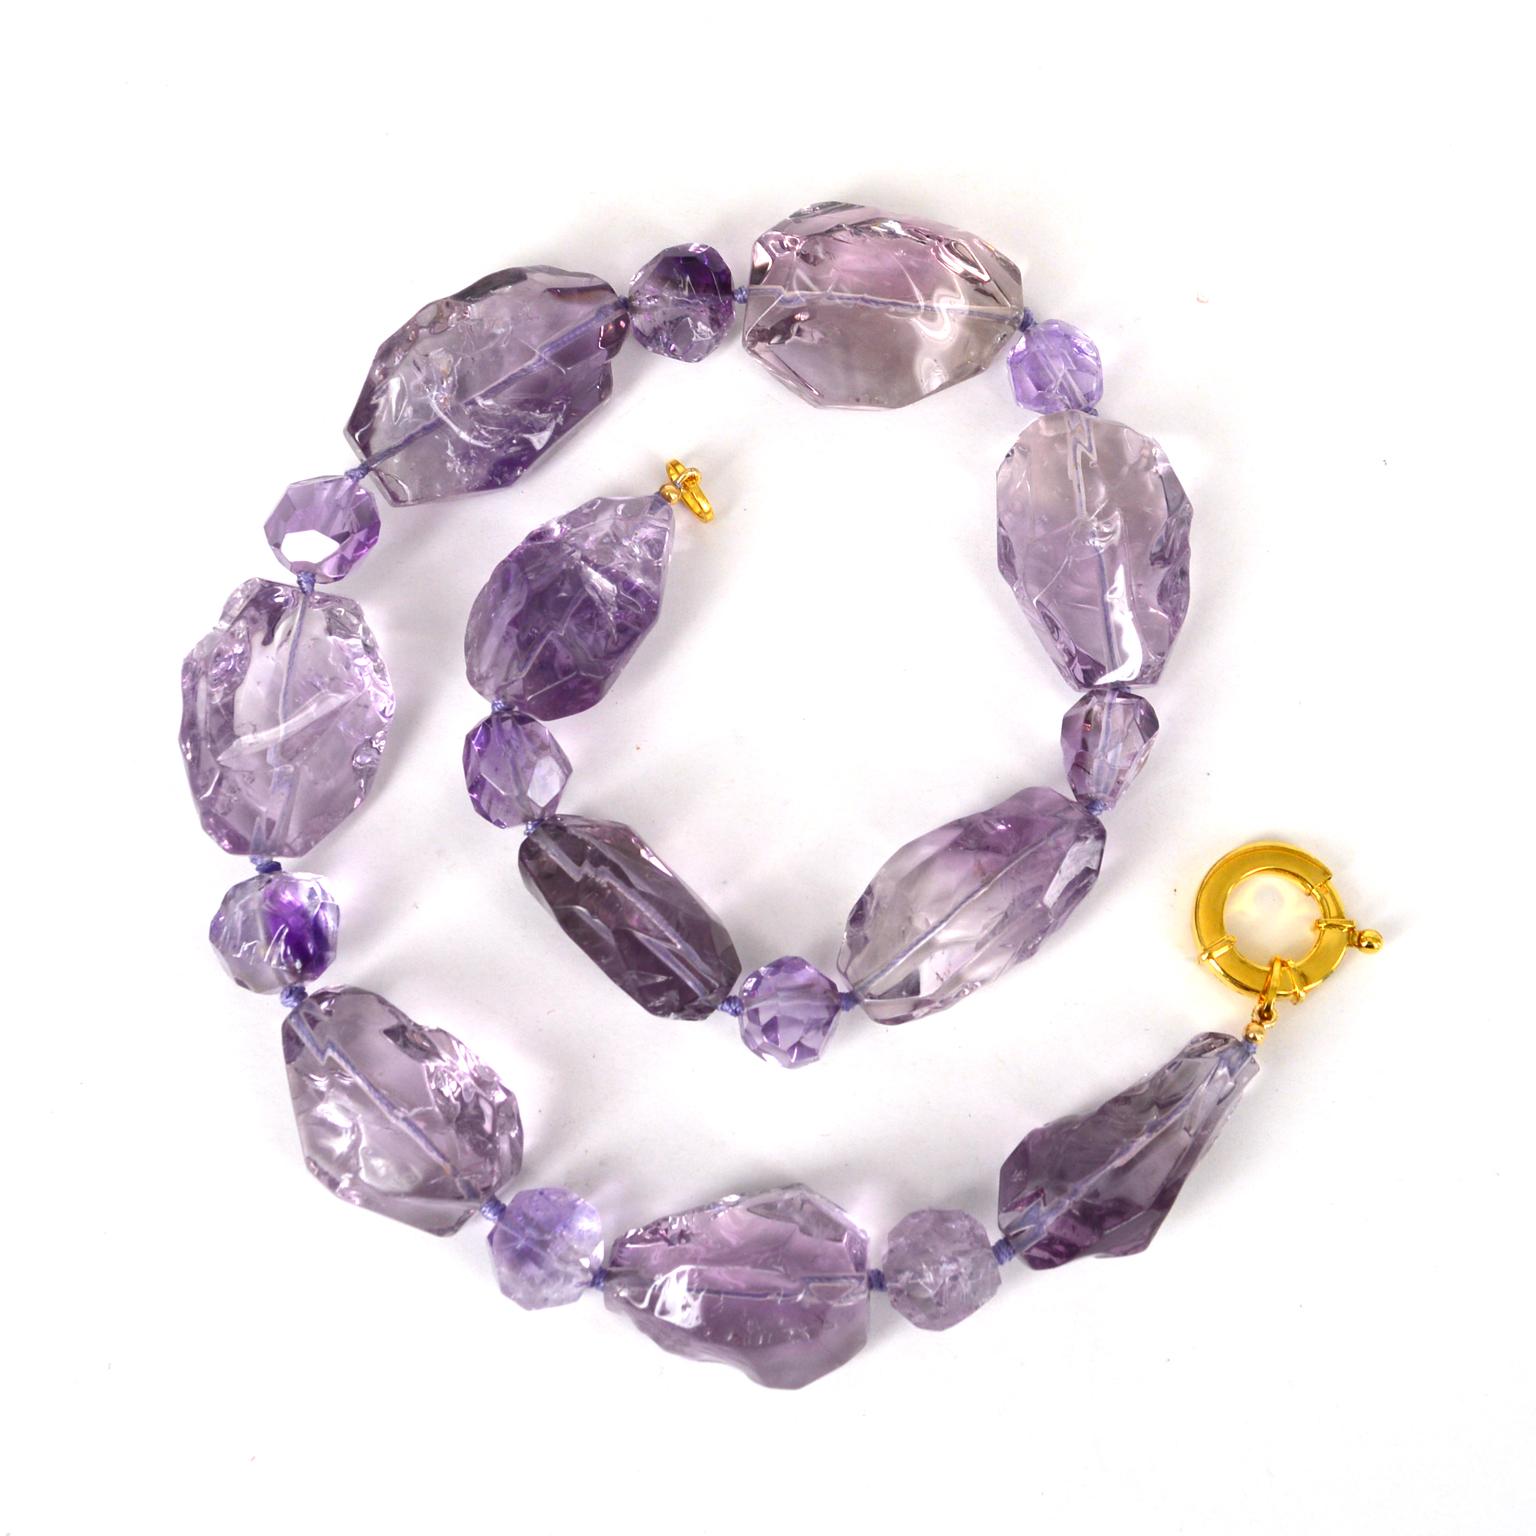 Purple Ice is what these lovely hammered Amethyst beads look like. Necklace is made from 10 pieces of 33-39mm hammered  finished clean Amethyst beads and 9 pieces of approx 14mm hammered  finished Amethyst beads hand knotted on purple thread with